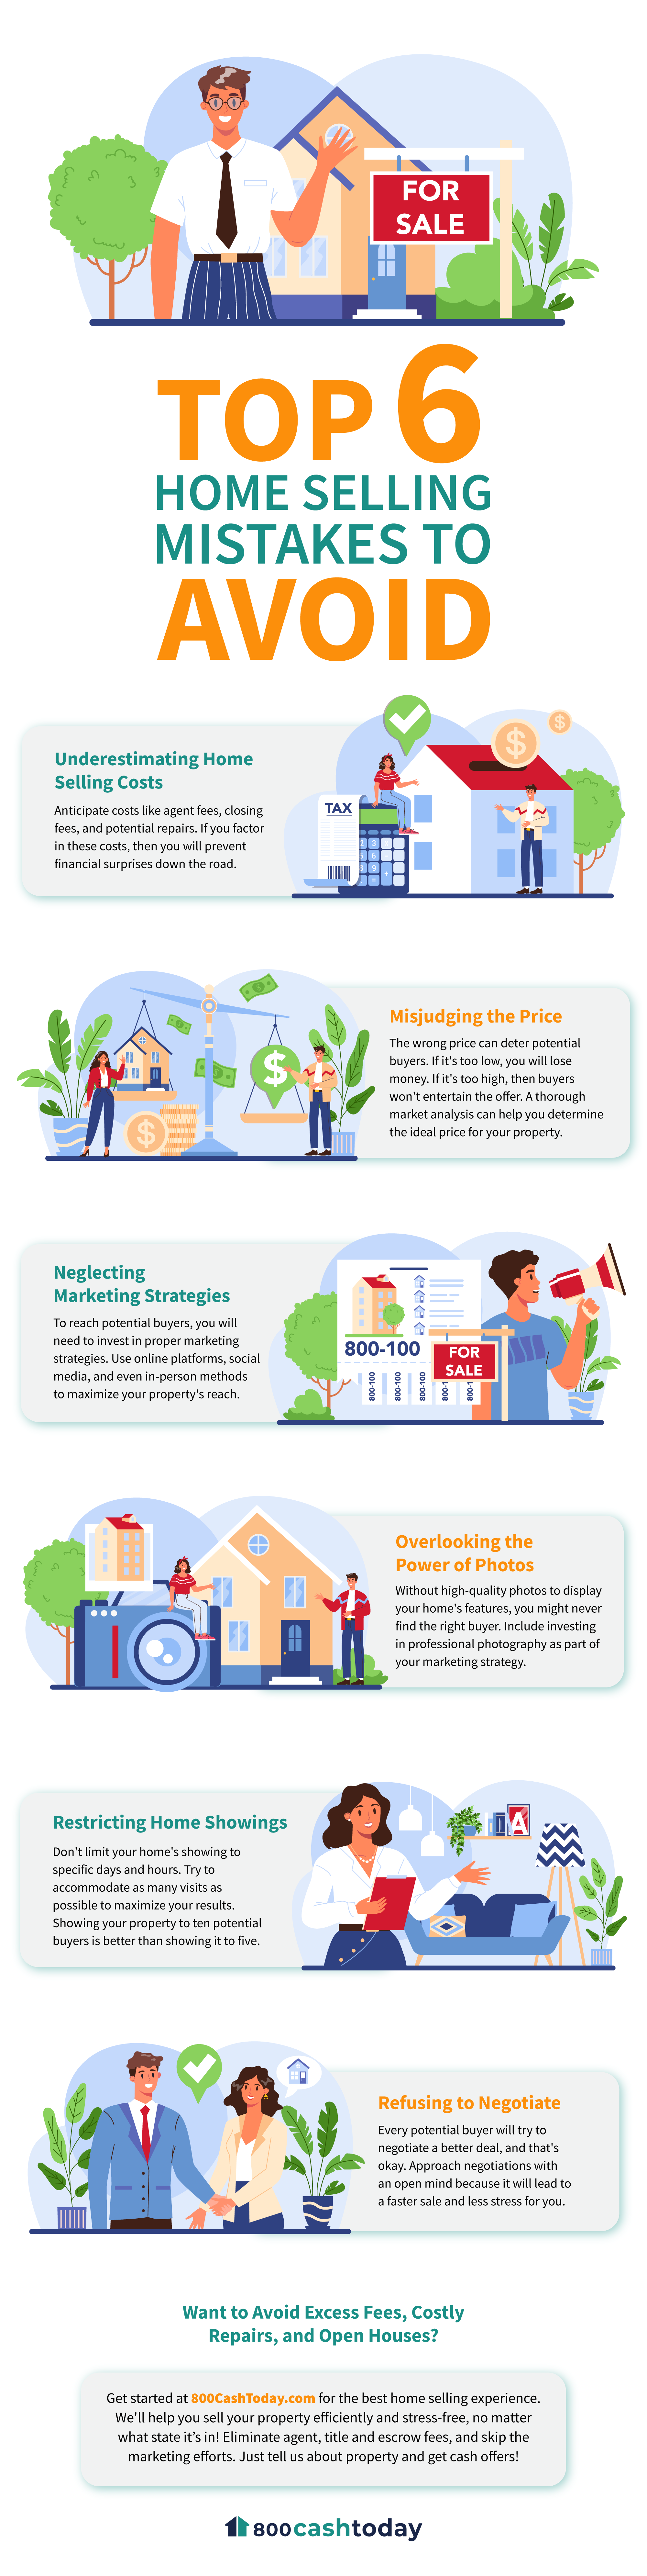 Top 6 Home Selling Mistakes to Avoid Infographic